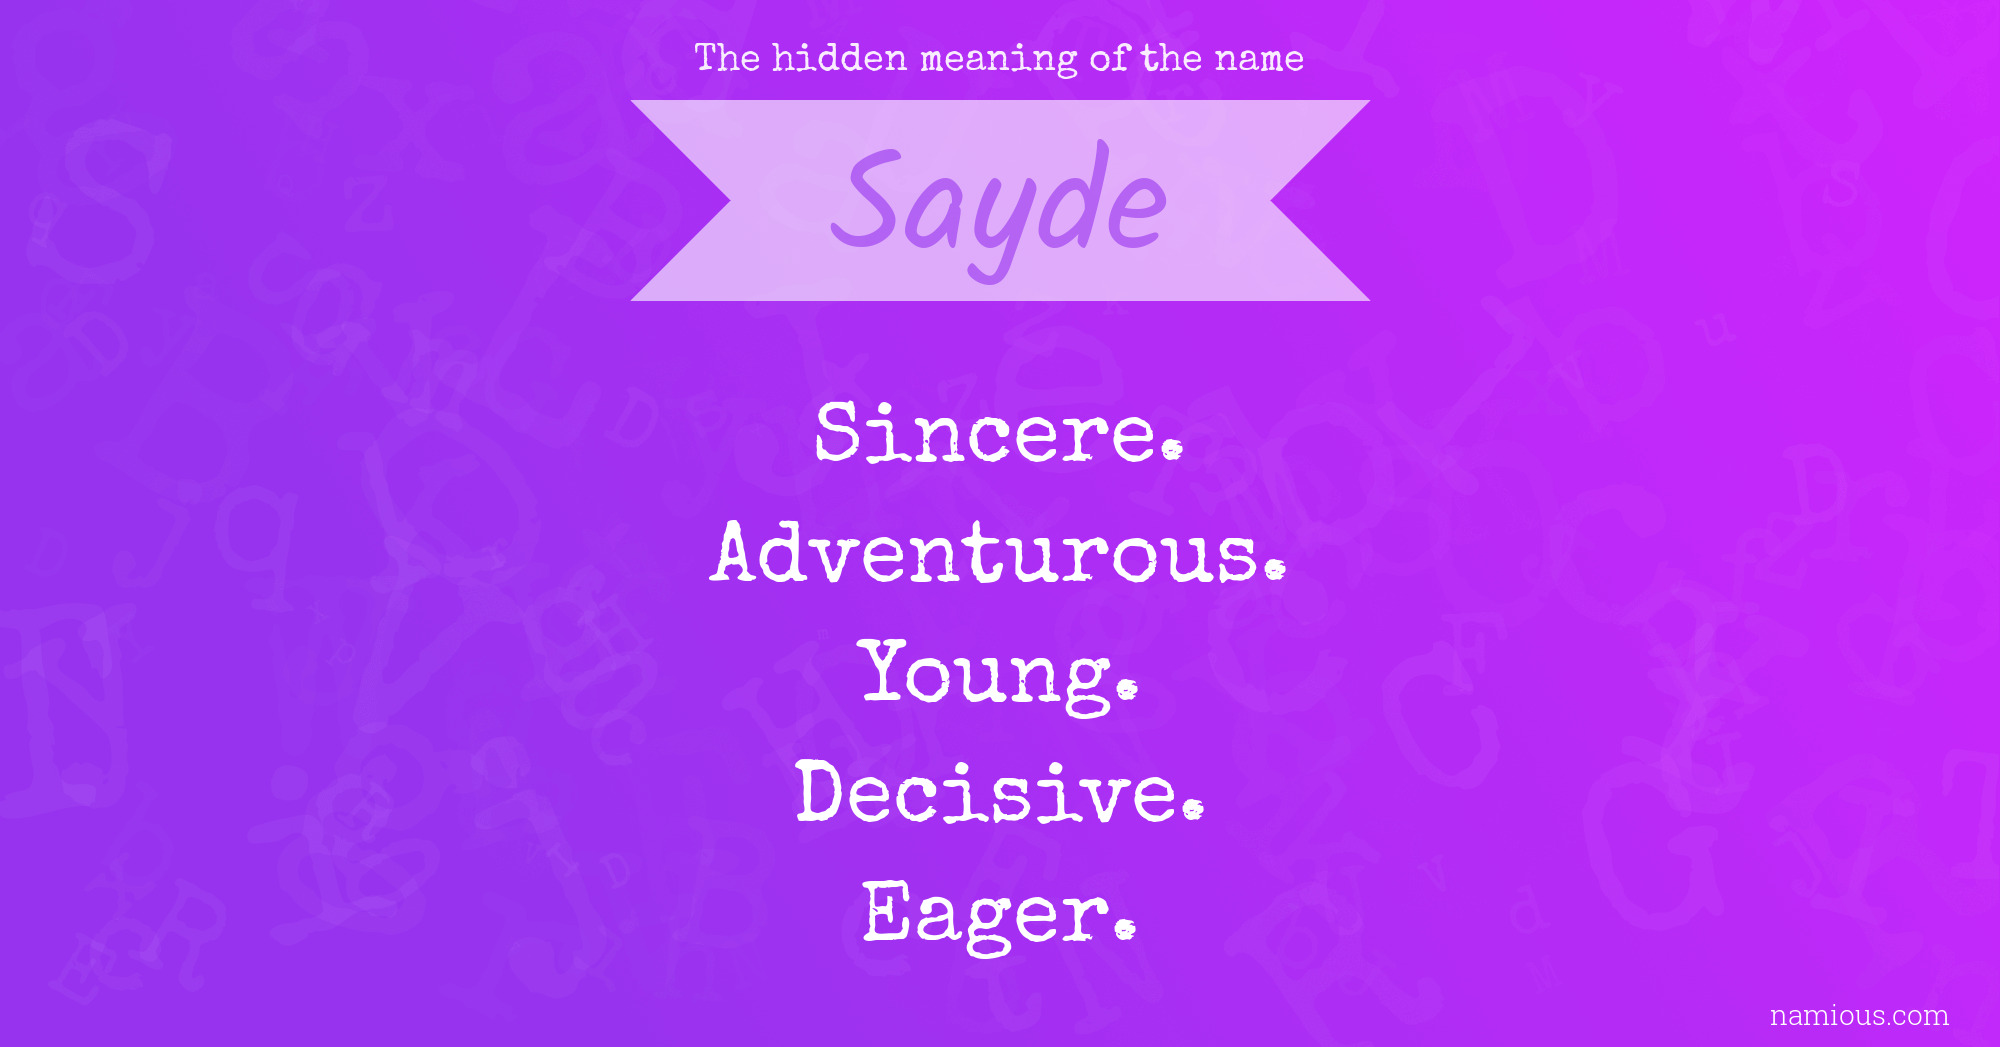 The hidden meaning of the name Sayde